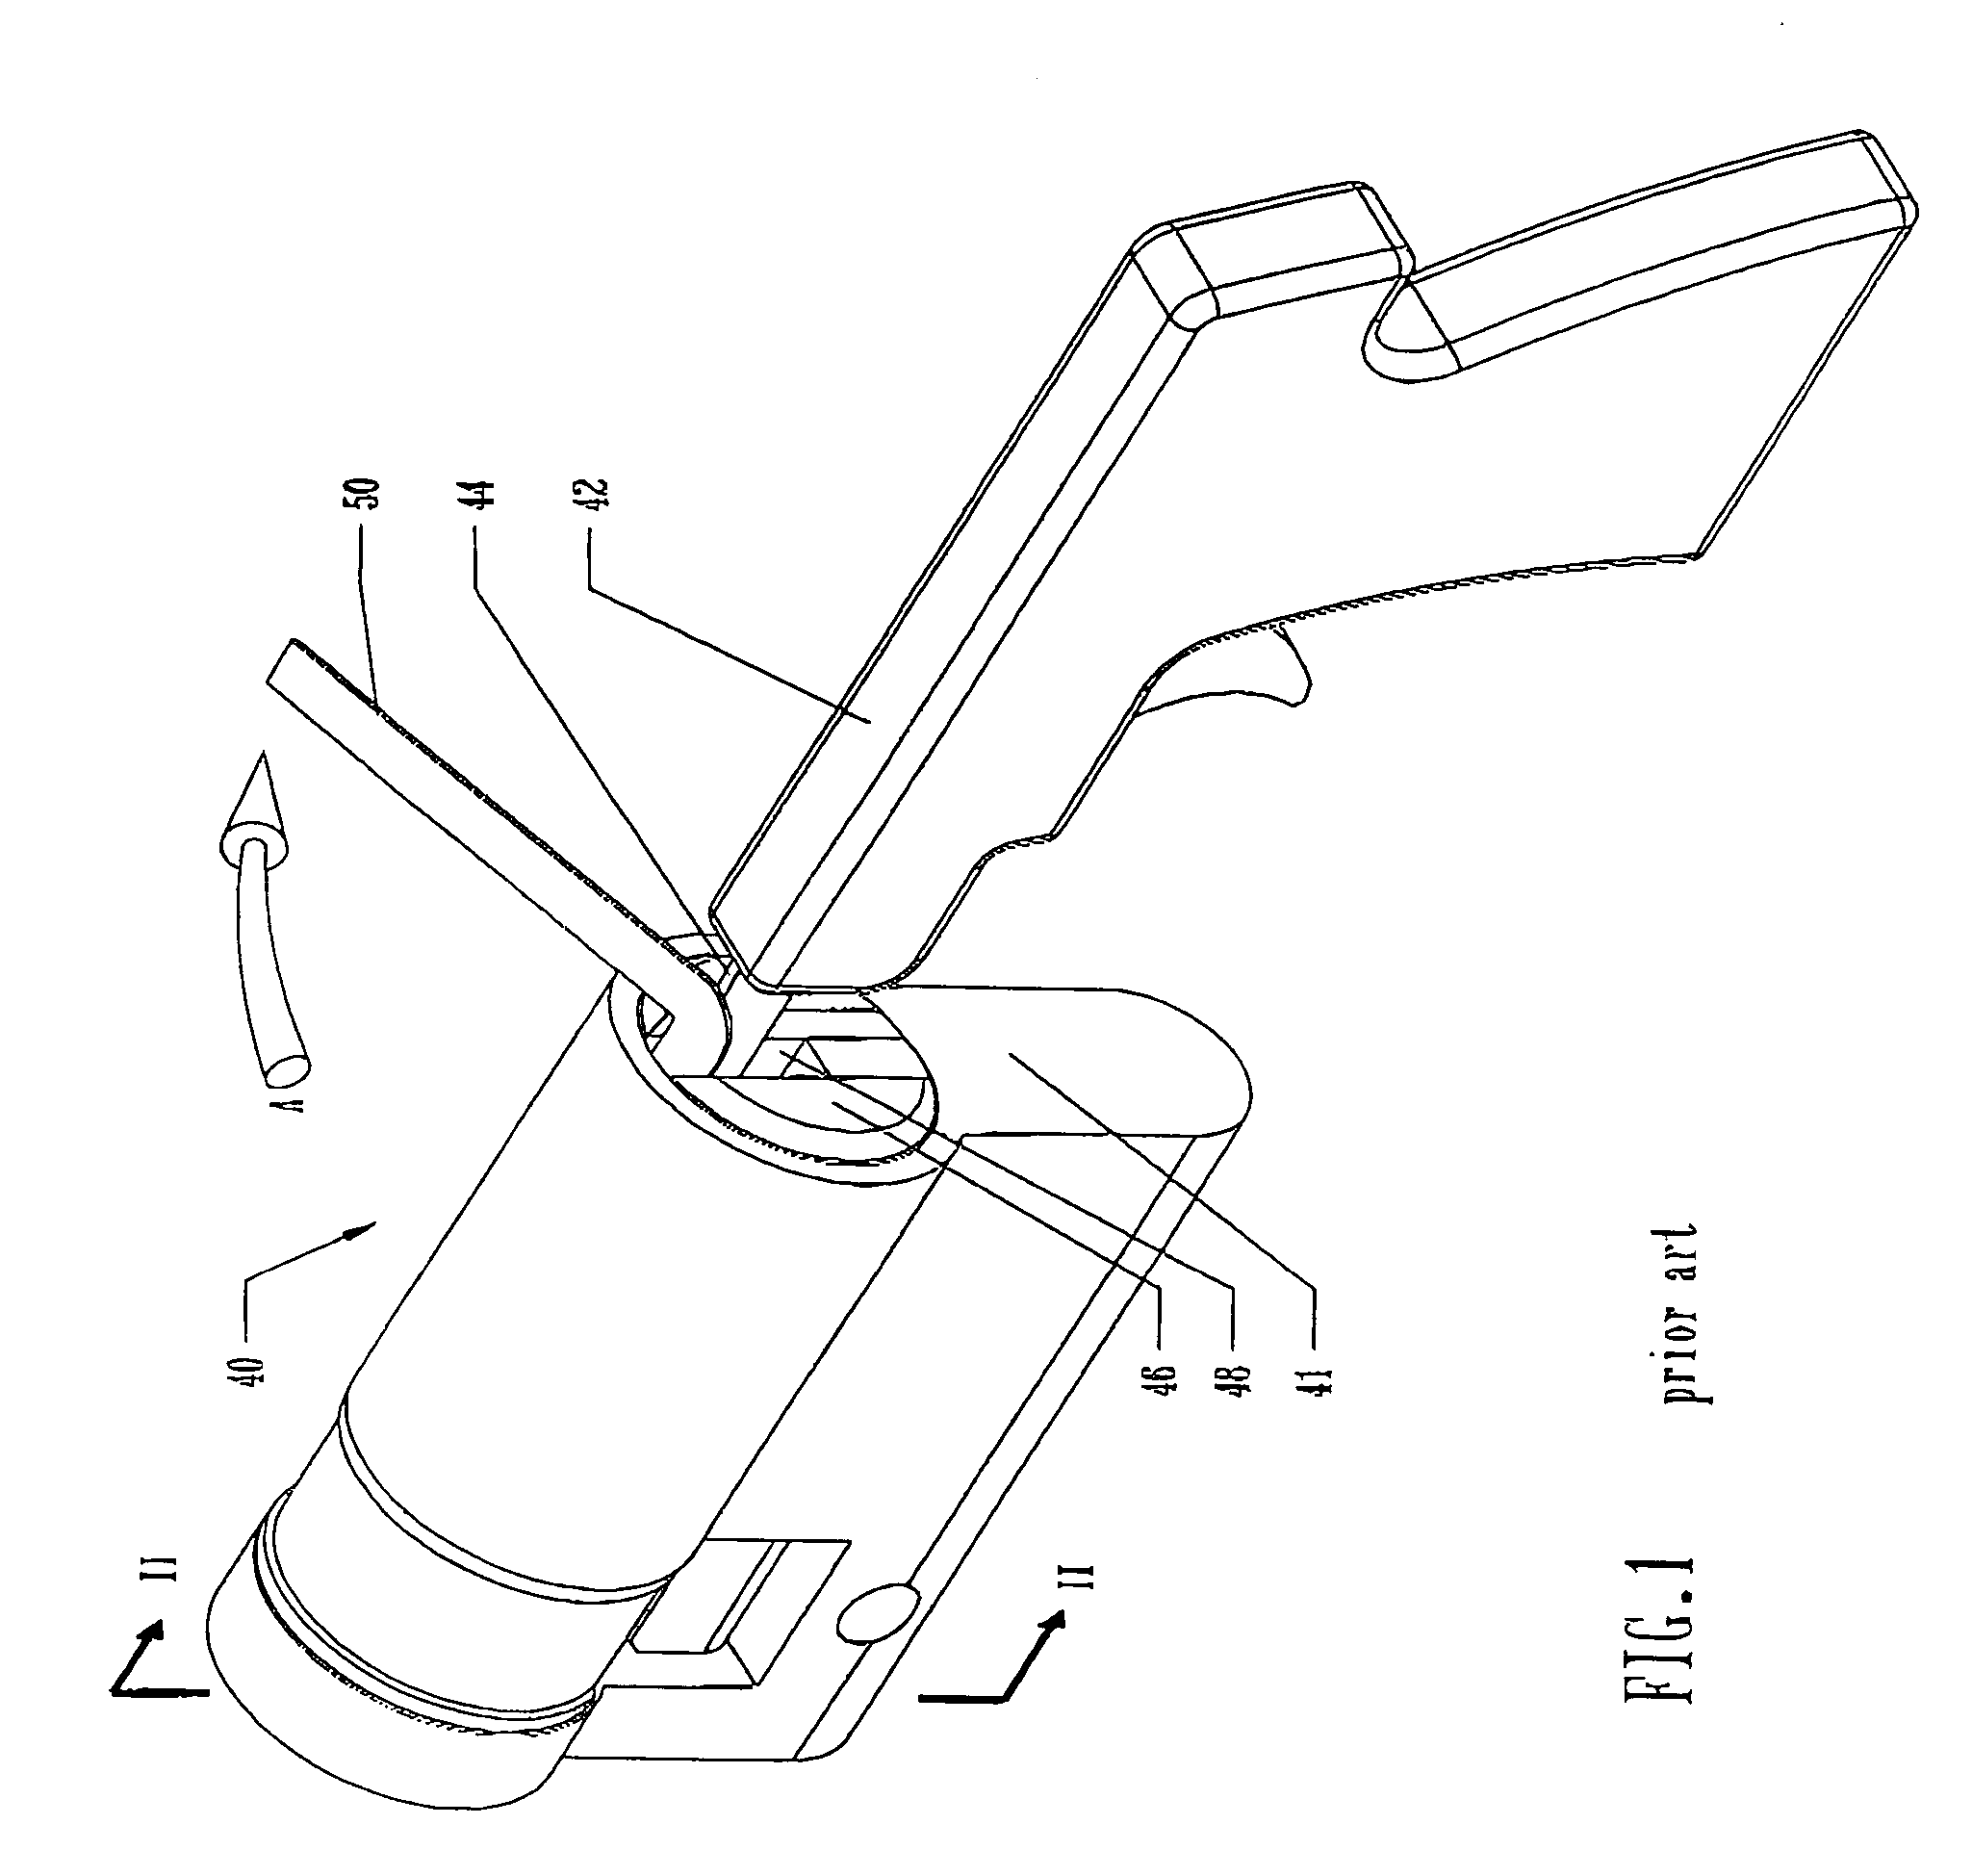 Method and assembly to prevent impact-driven manipulation of cylinder locks